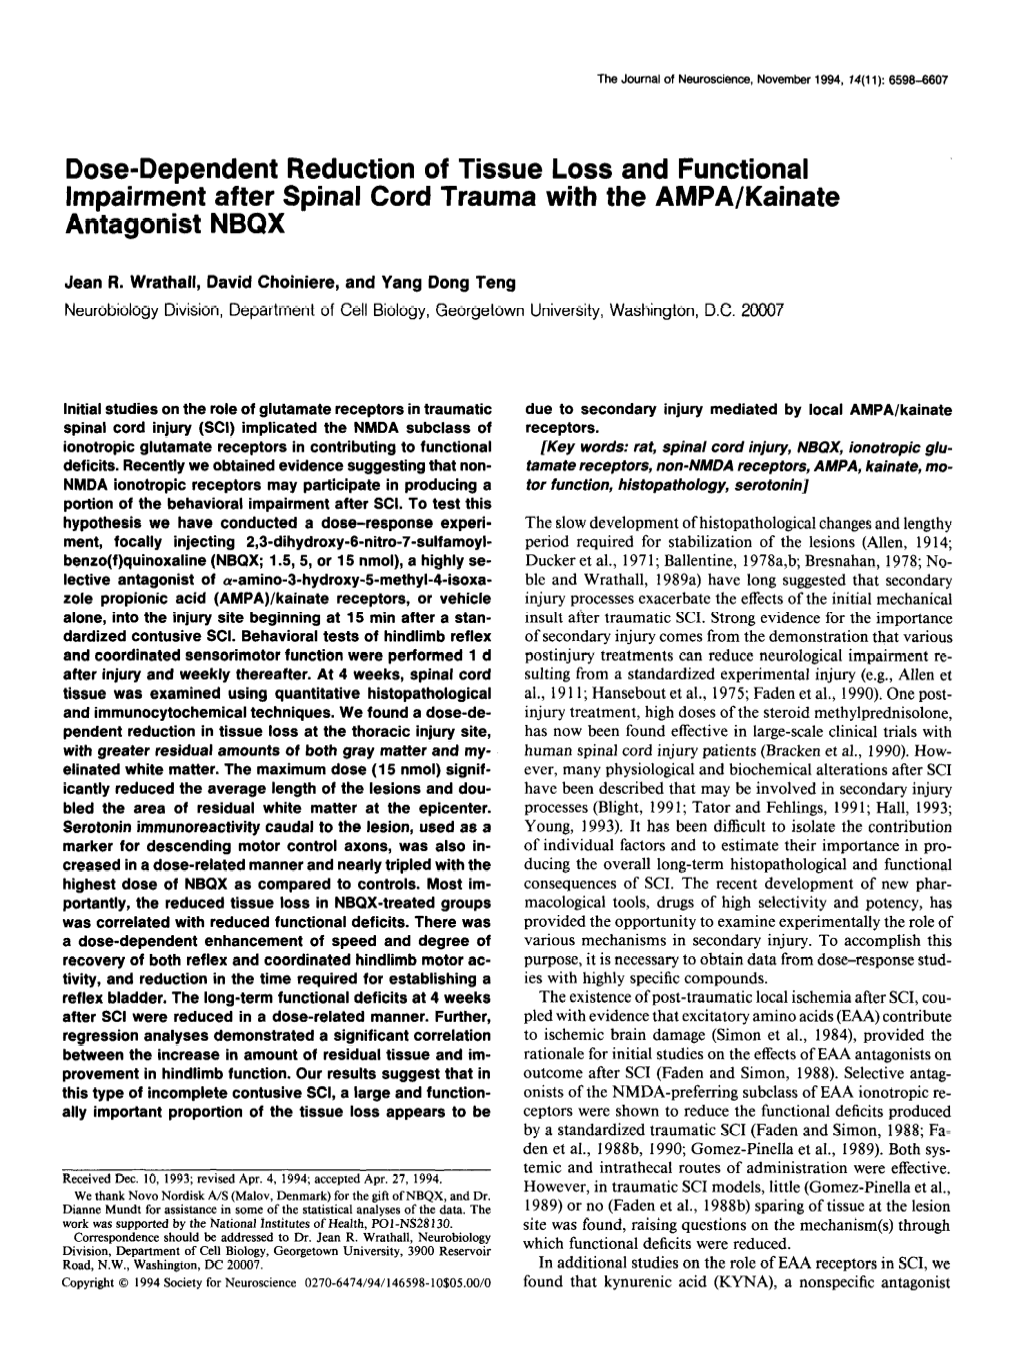 Dose-Dependent Reduction of Tissue Loss and Functional Impairment After Spinal Cord Trauma with the AMPA/Kainate Antagonist NBQX